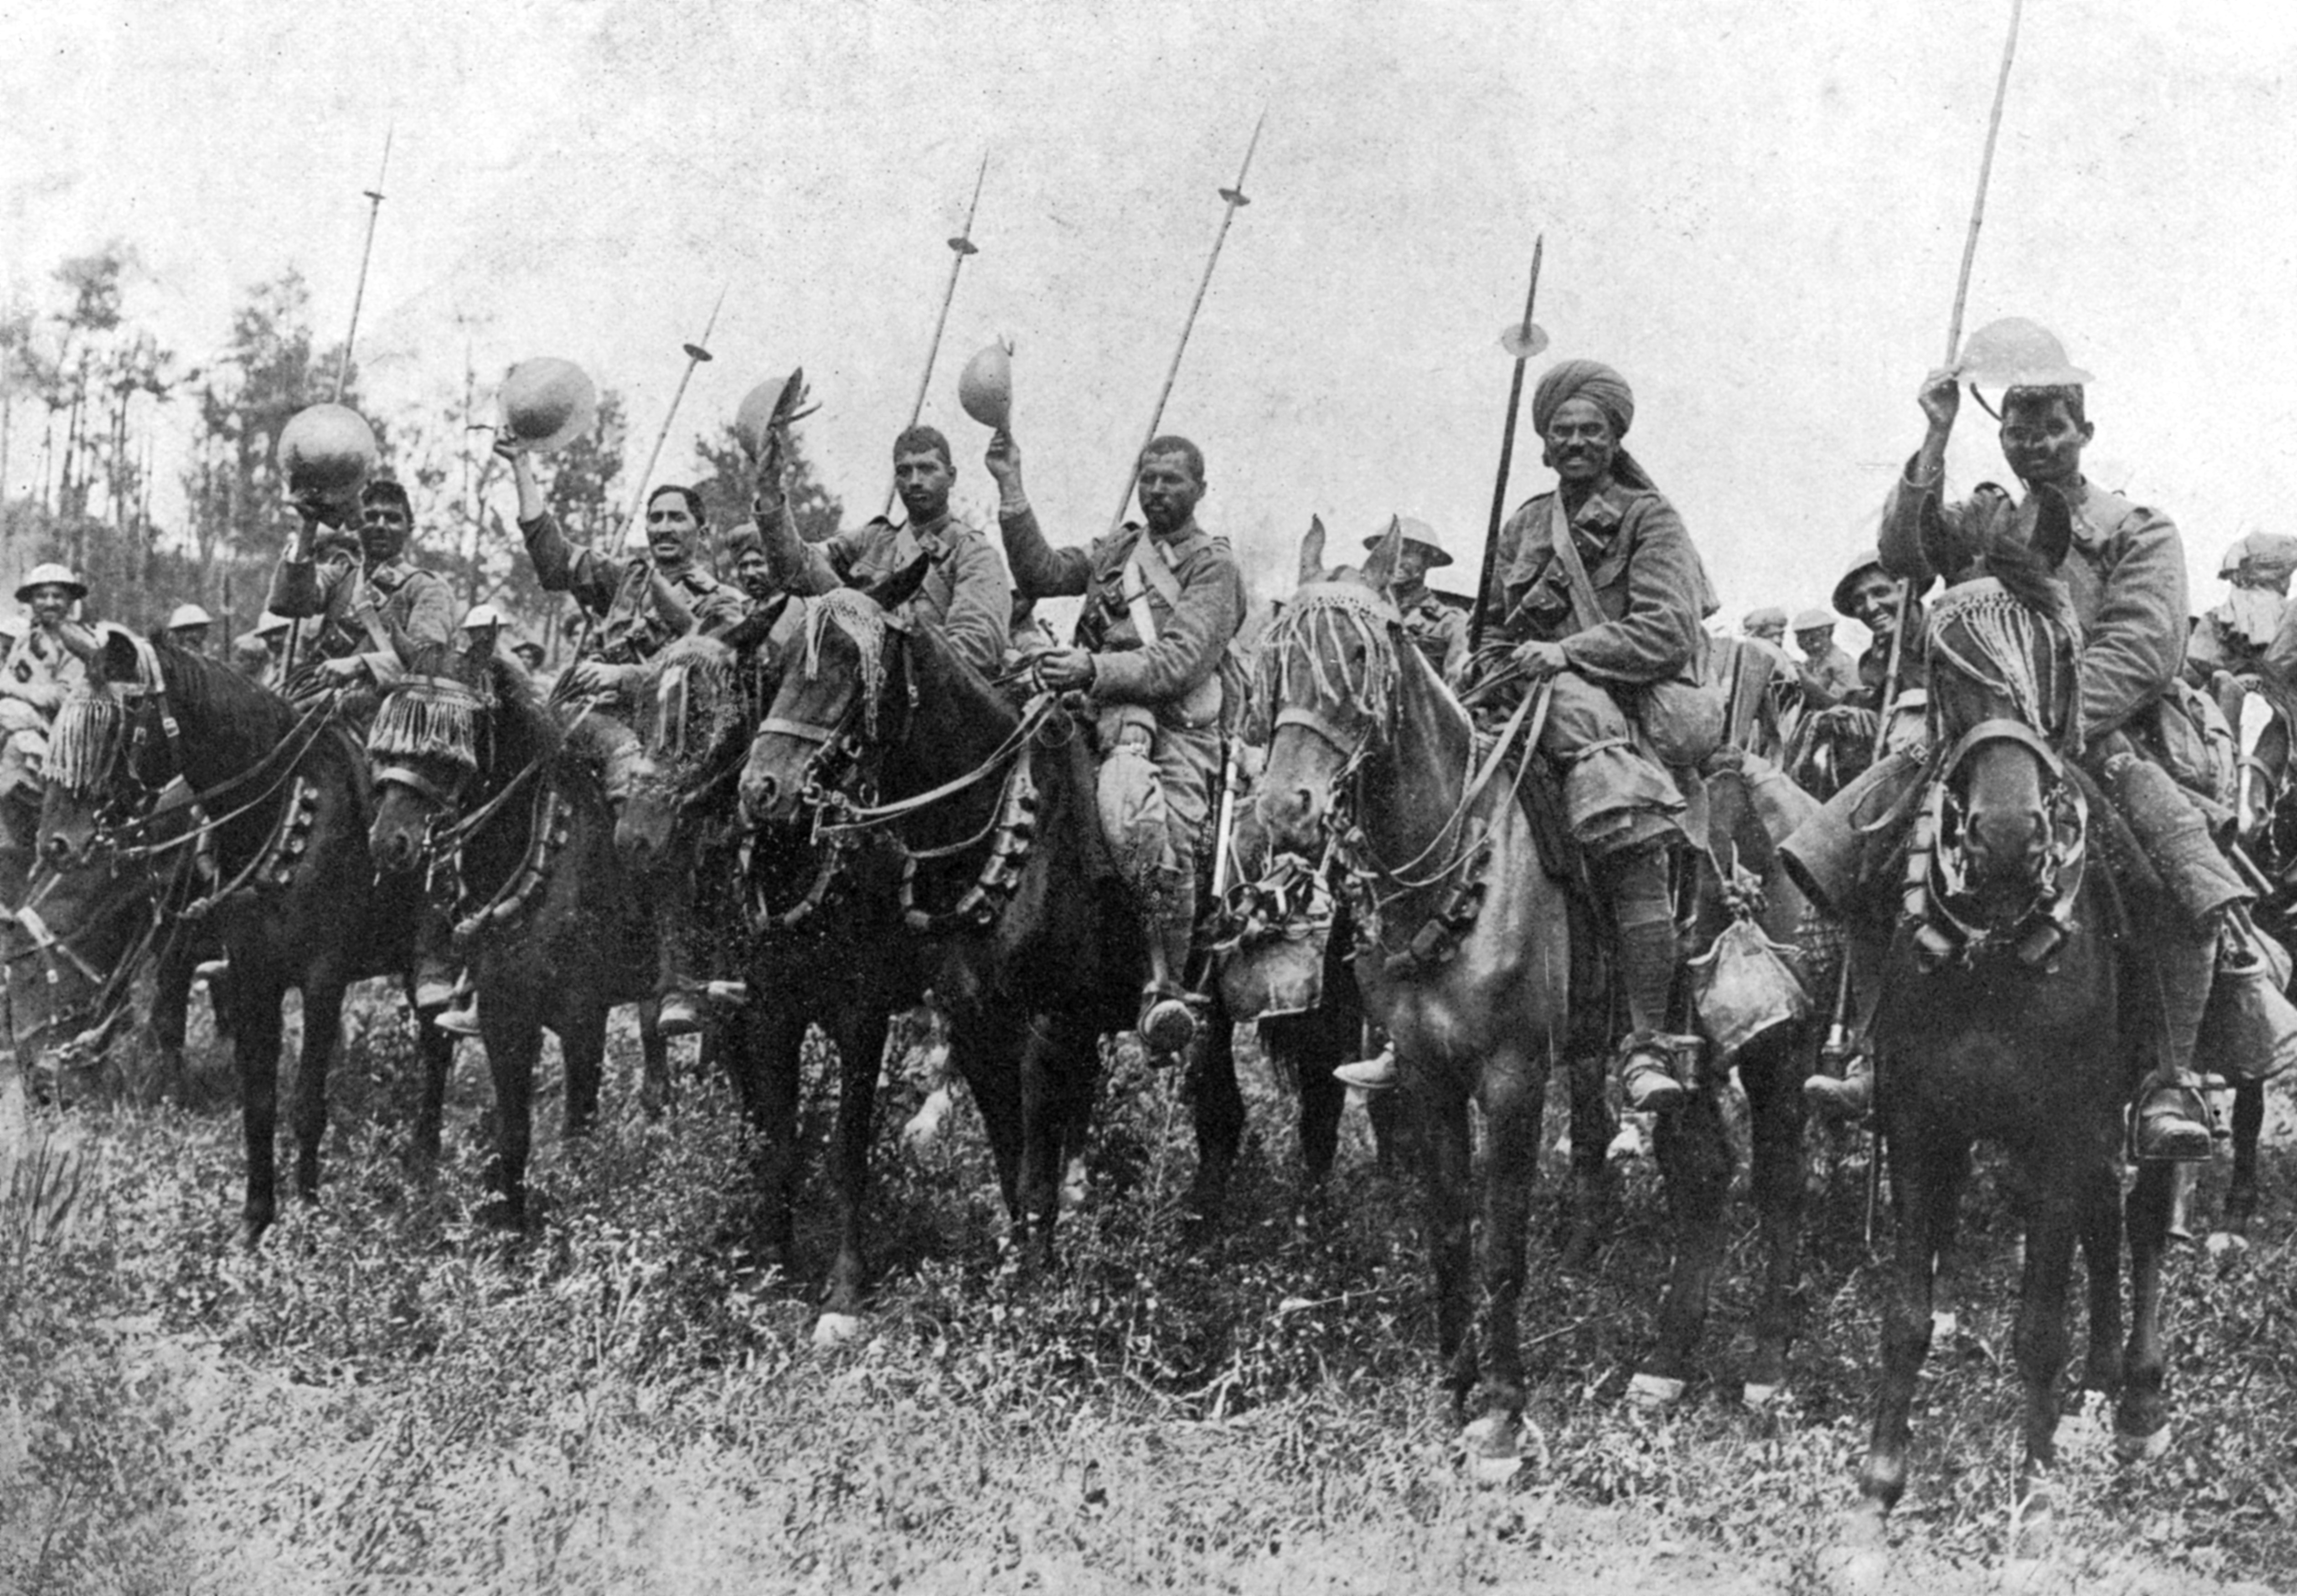 Indian cavalry after their charge, Somme, France, First World War, 14 July 1916, (c1920). Illustration from The Illustrated War Record of the Most Notable Episodes in the Great European War 1914-1918, seventh edition, (The Swarthmore Press Ltd, London, c1920). (Photo by The Print Collector/Print Collector/Getty Images)